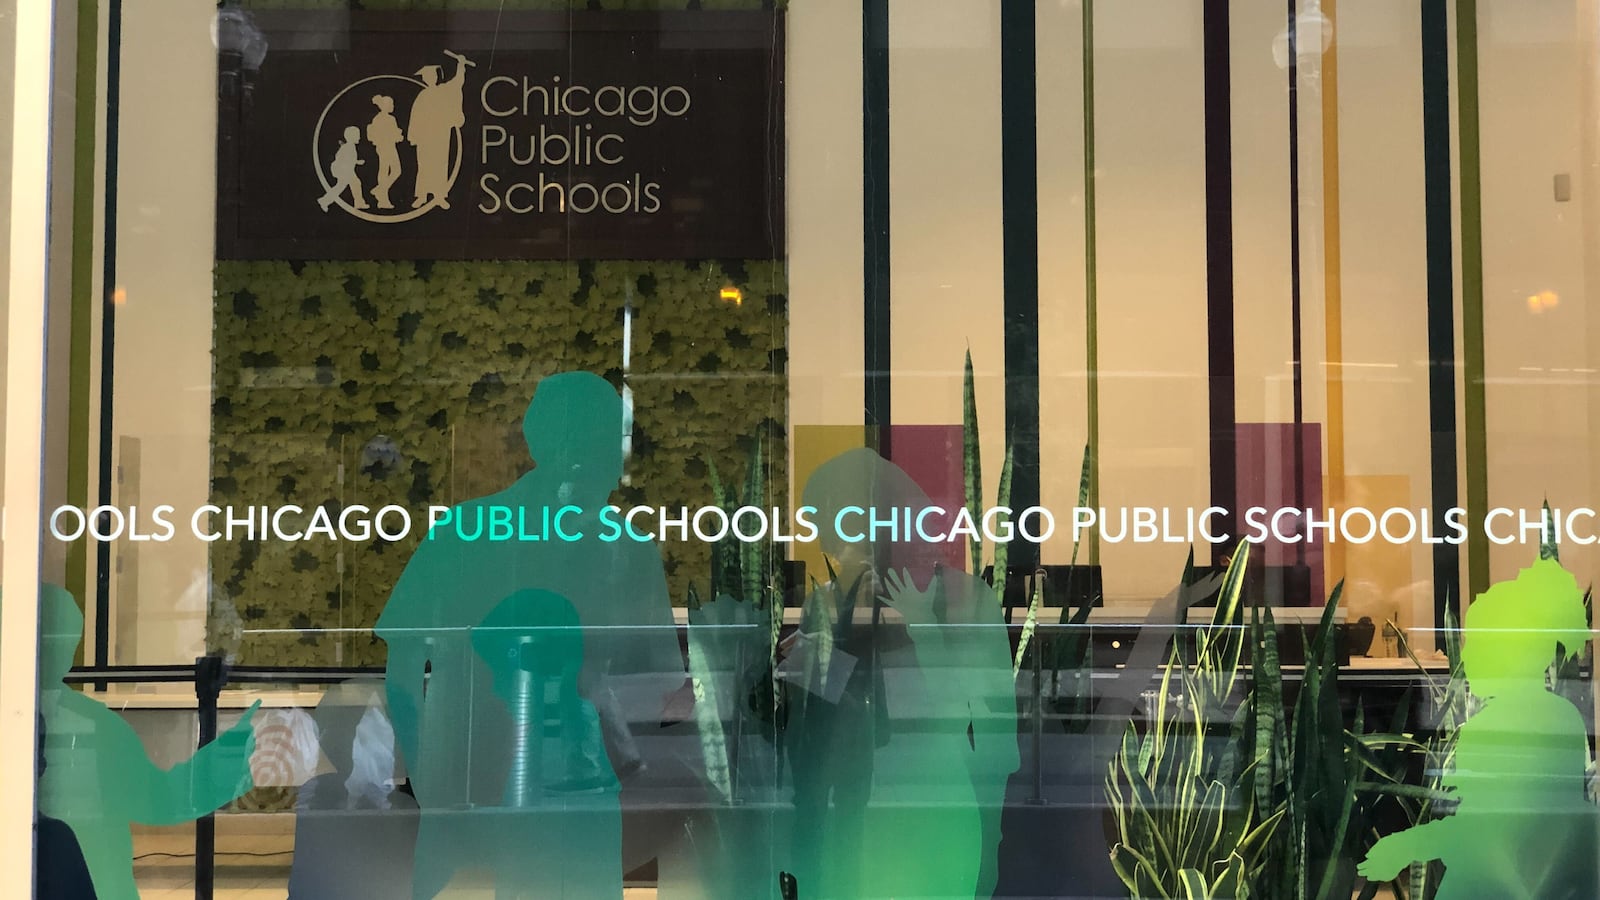 The facade of Chicago Public Schools headquarters, with the district’s sign hanging on the wall behind windows with green silhouettes of students.